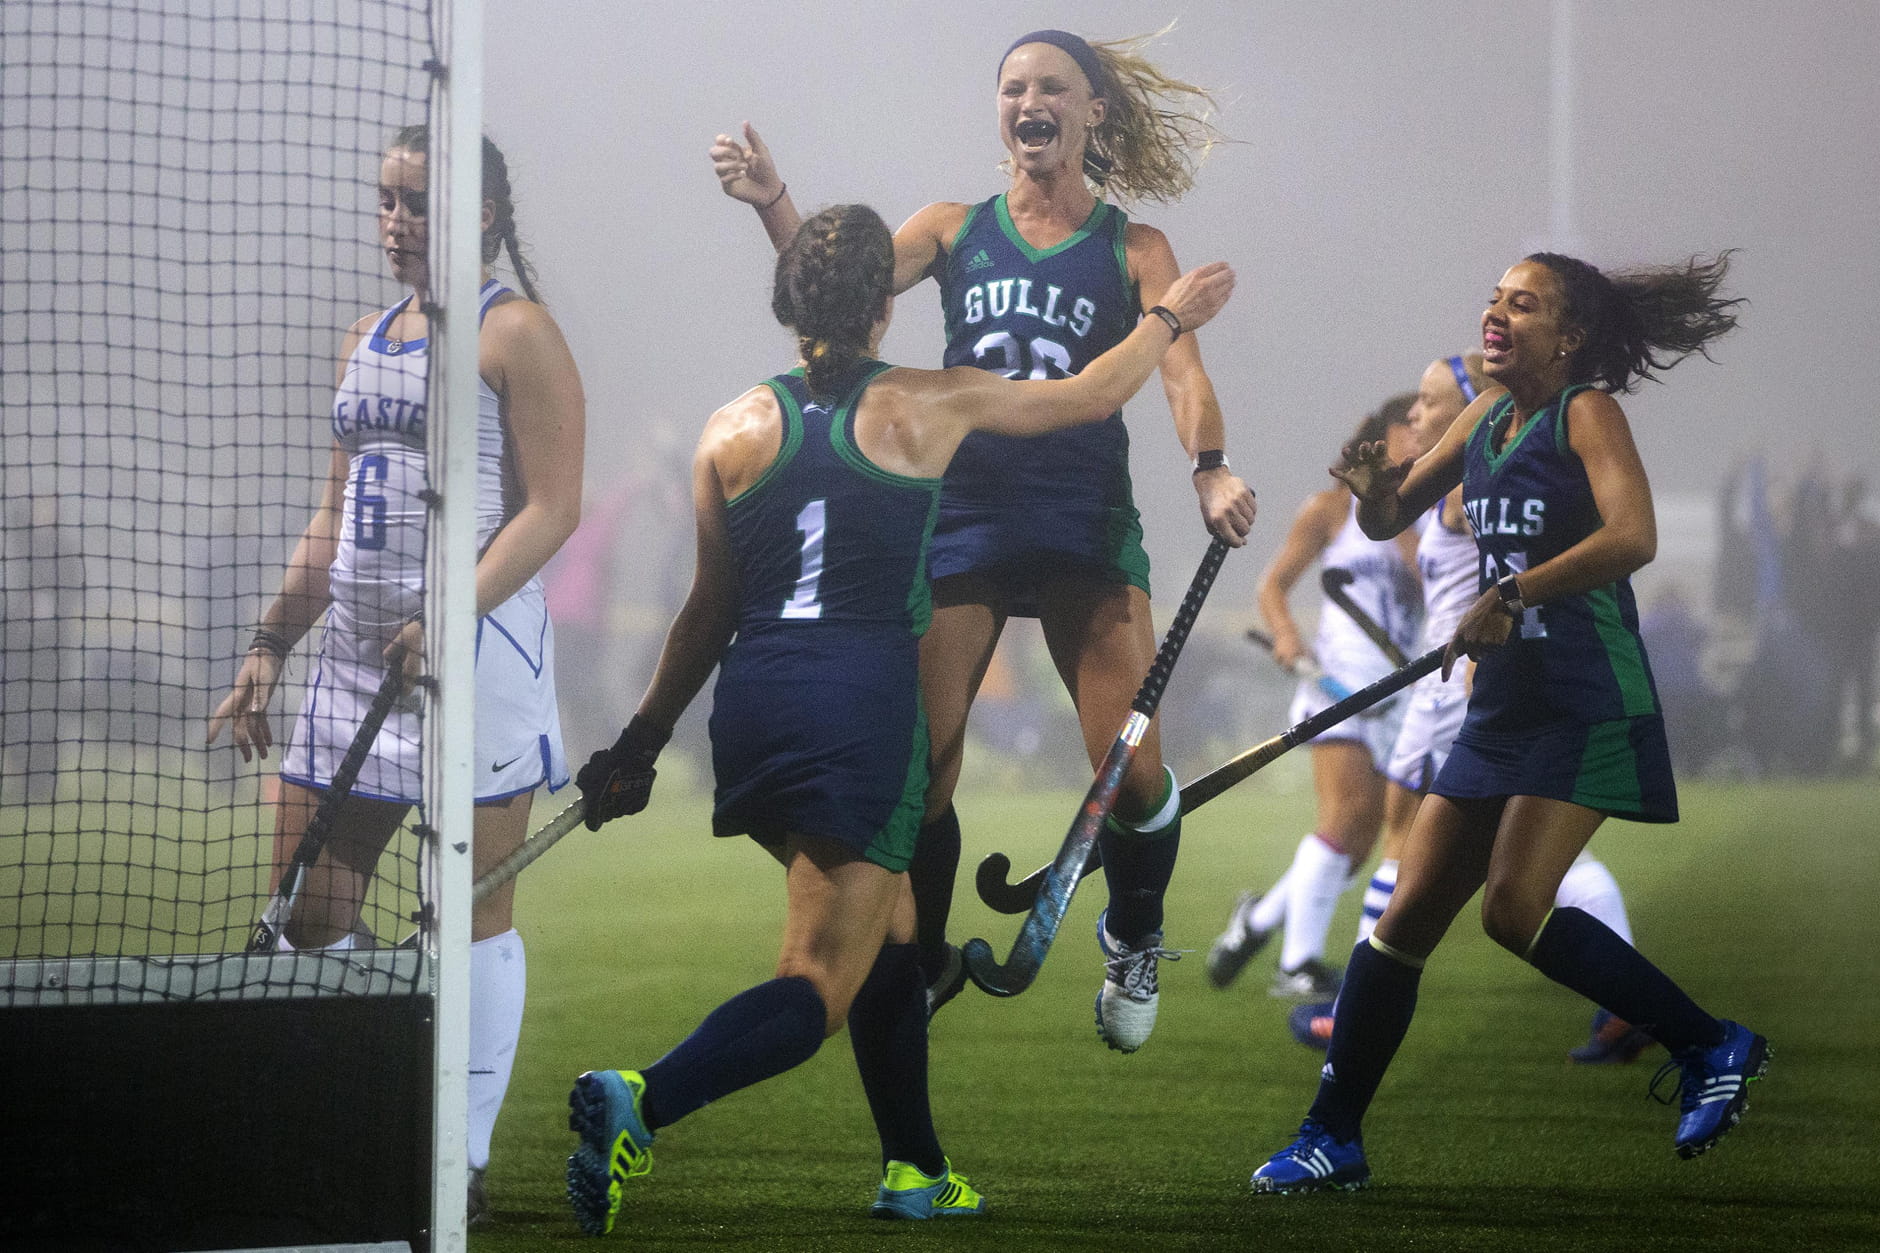 Endicott's Emily Wood (20) leaps in celebration after scoring the game-winning goal against the University of New England in field hockey action at Endicott college, Beverly, Mass. The final score was Endicott 2 and UNE 1.